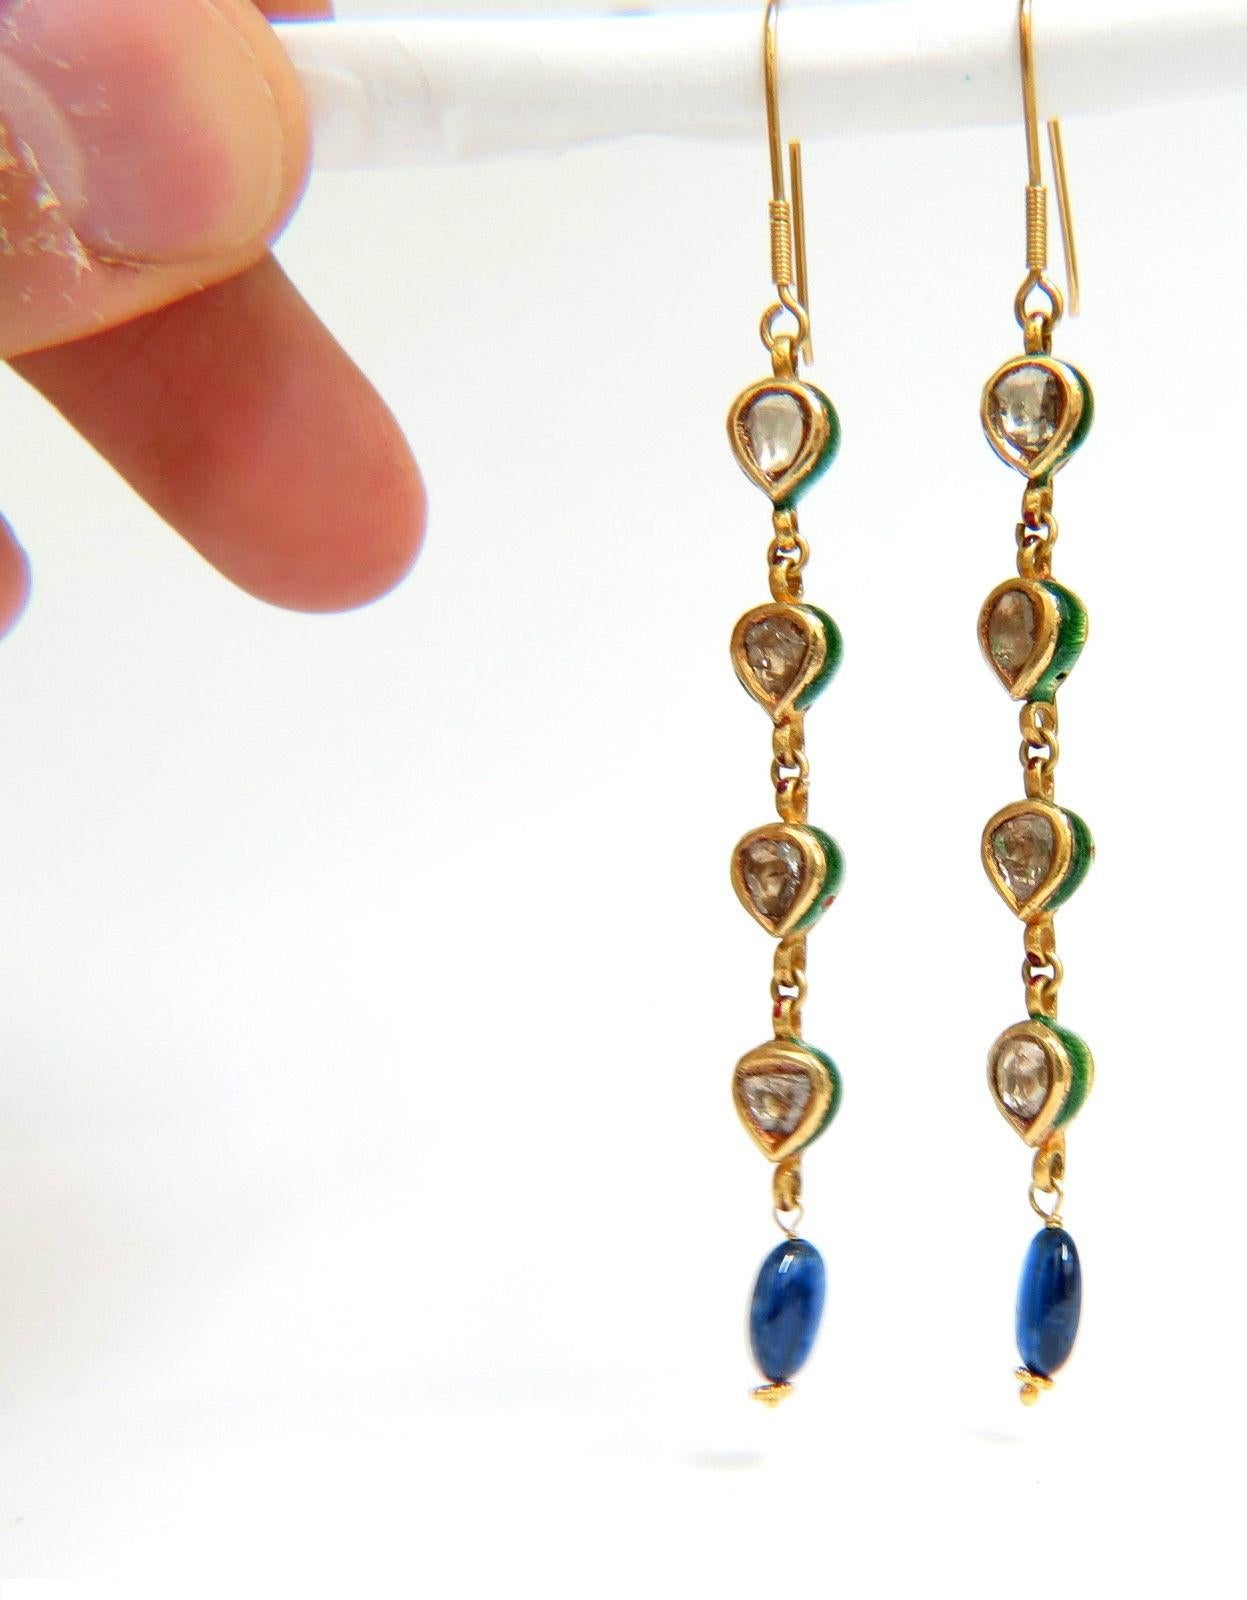 18 Karat 2.15 Carat Natural Sapphire Diamond Dangle Earrings Moghul Enamel In Excellent Condition For Sale In New York, NY